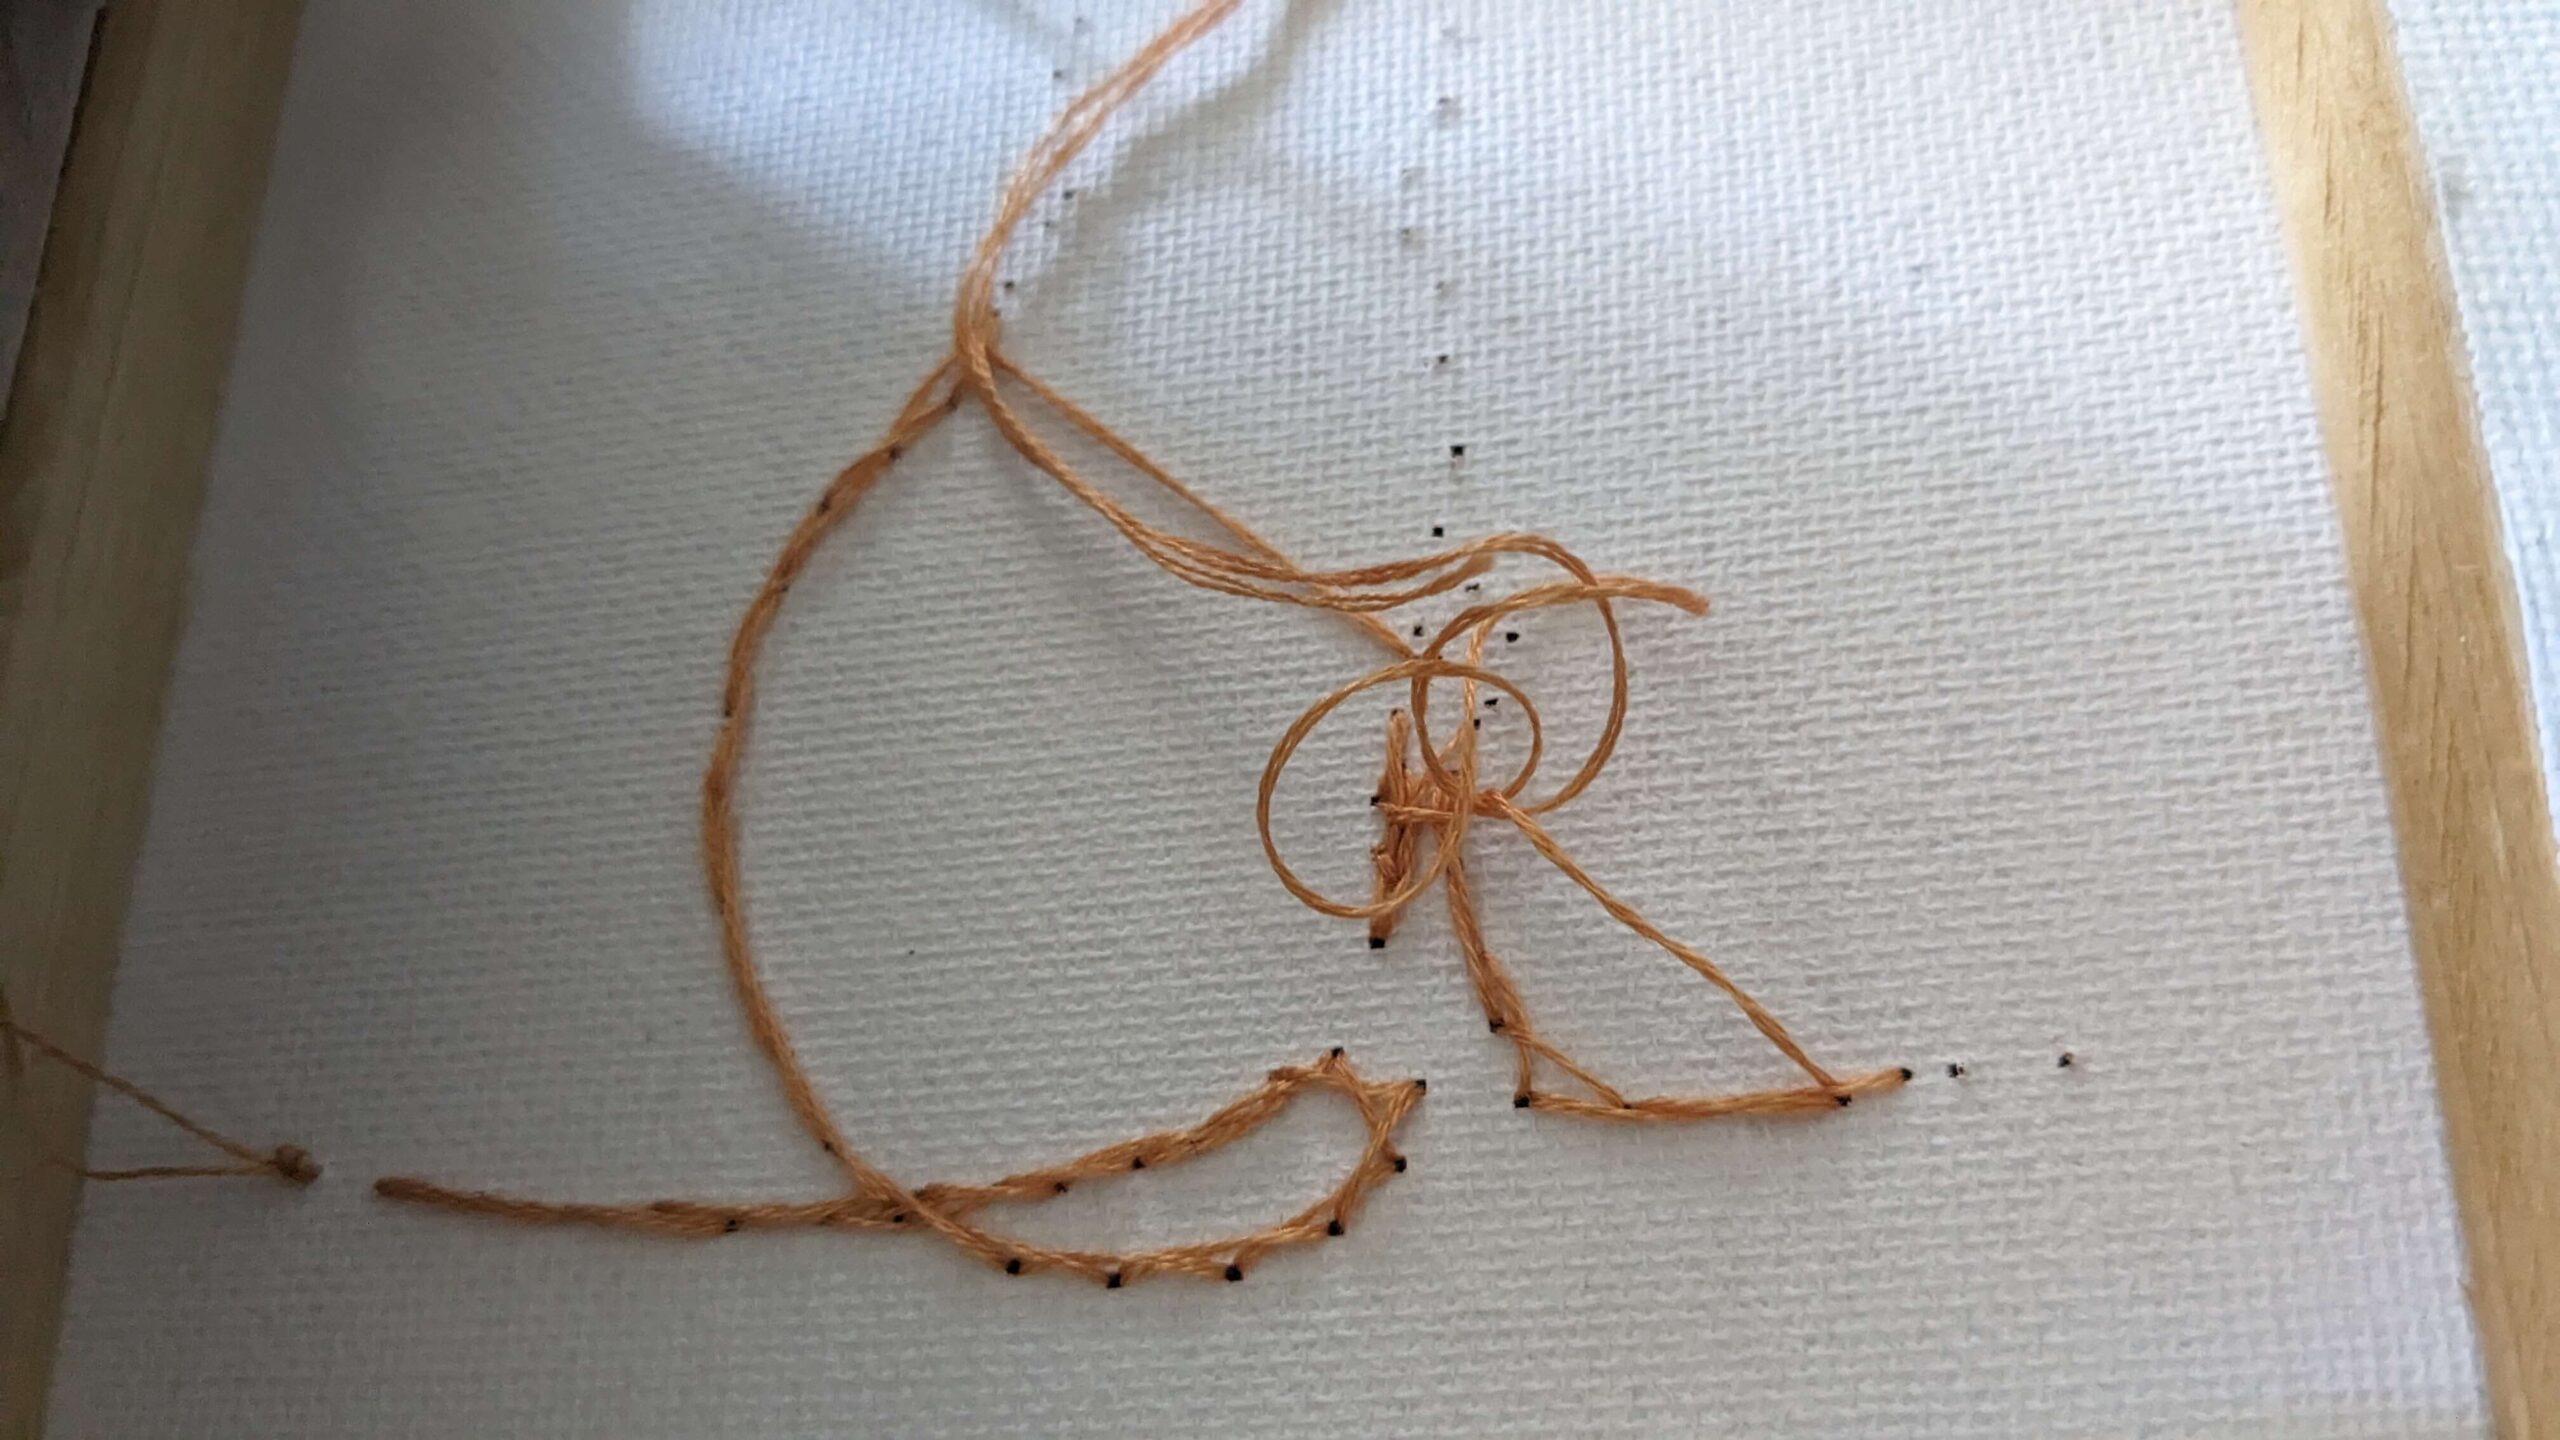 back of a canvas with orange embroidery floss in the shape of a cat